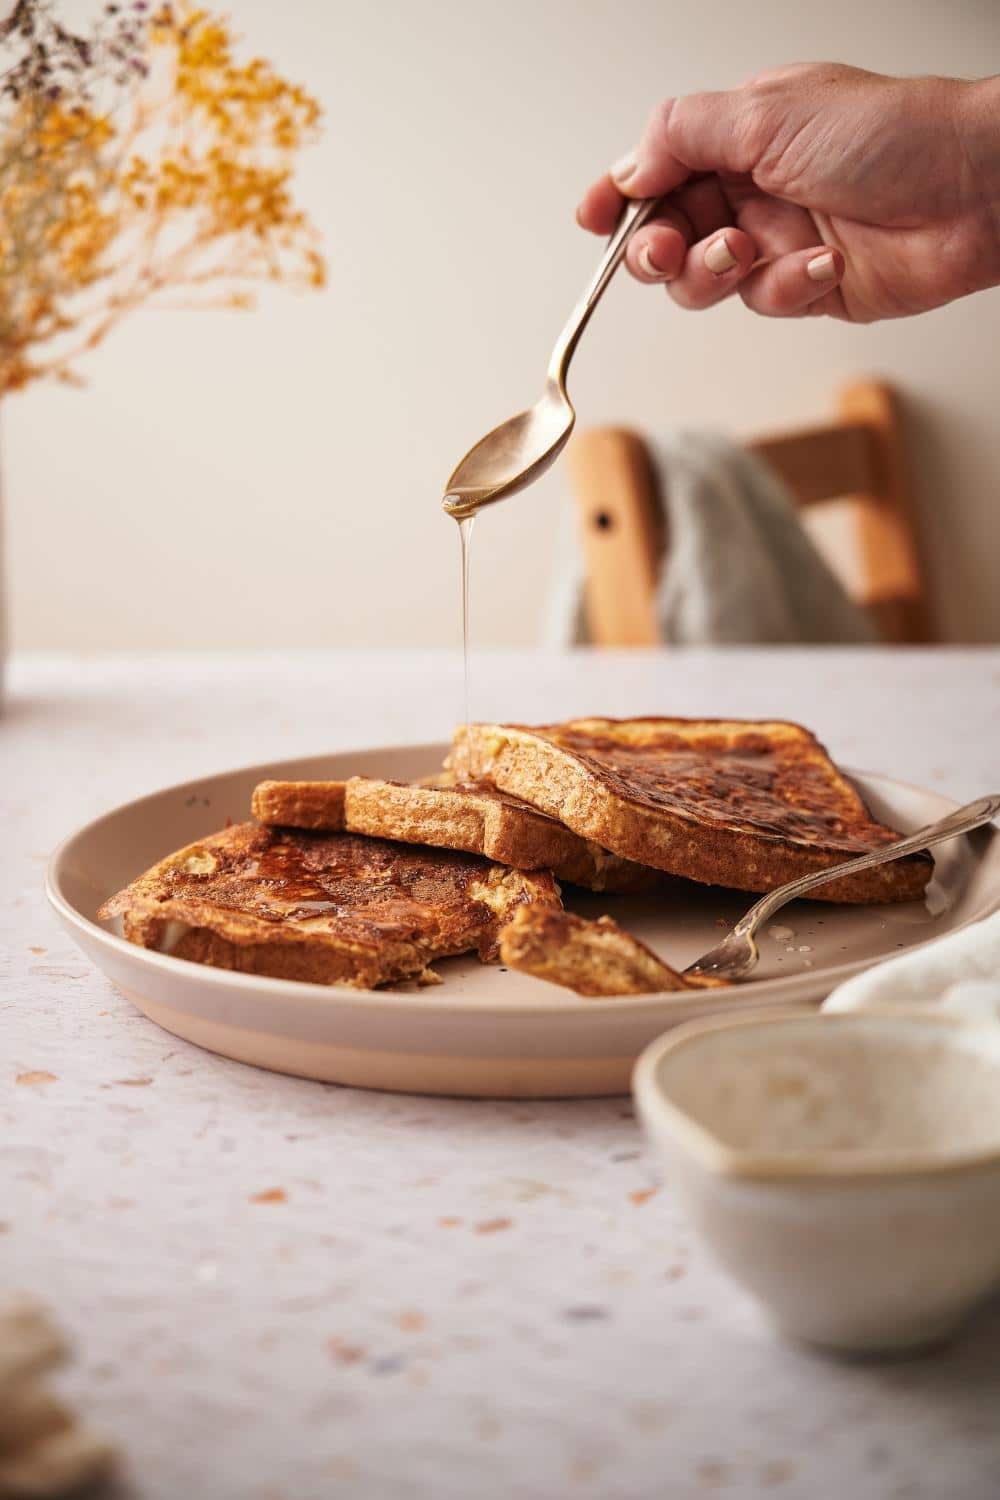 Three pieces of french toast arranged on a plate. A hand is pouring syrup over the toasts with a spoon and a fork with a piece of french toast is on the plate.